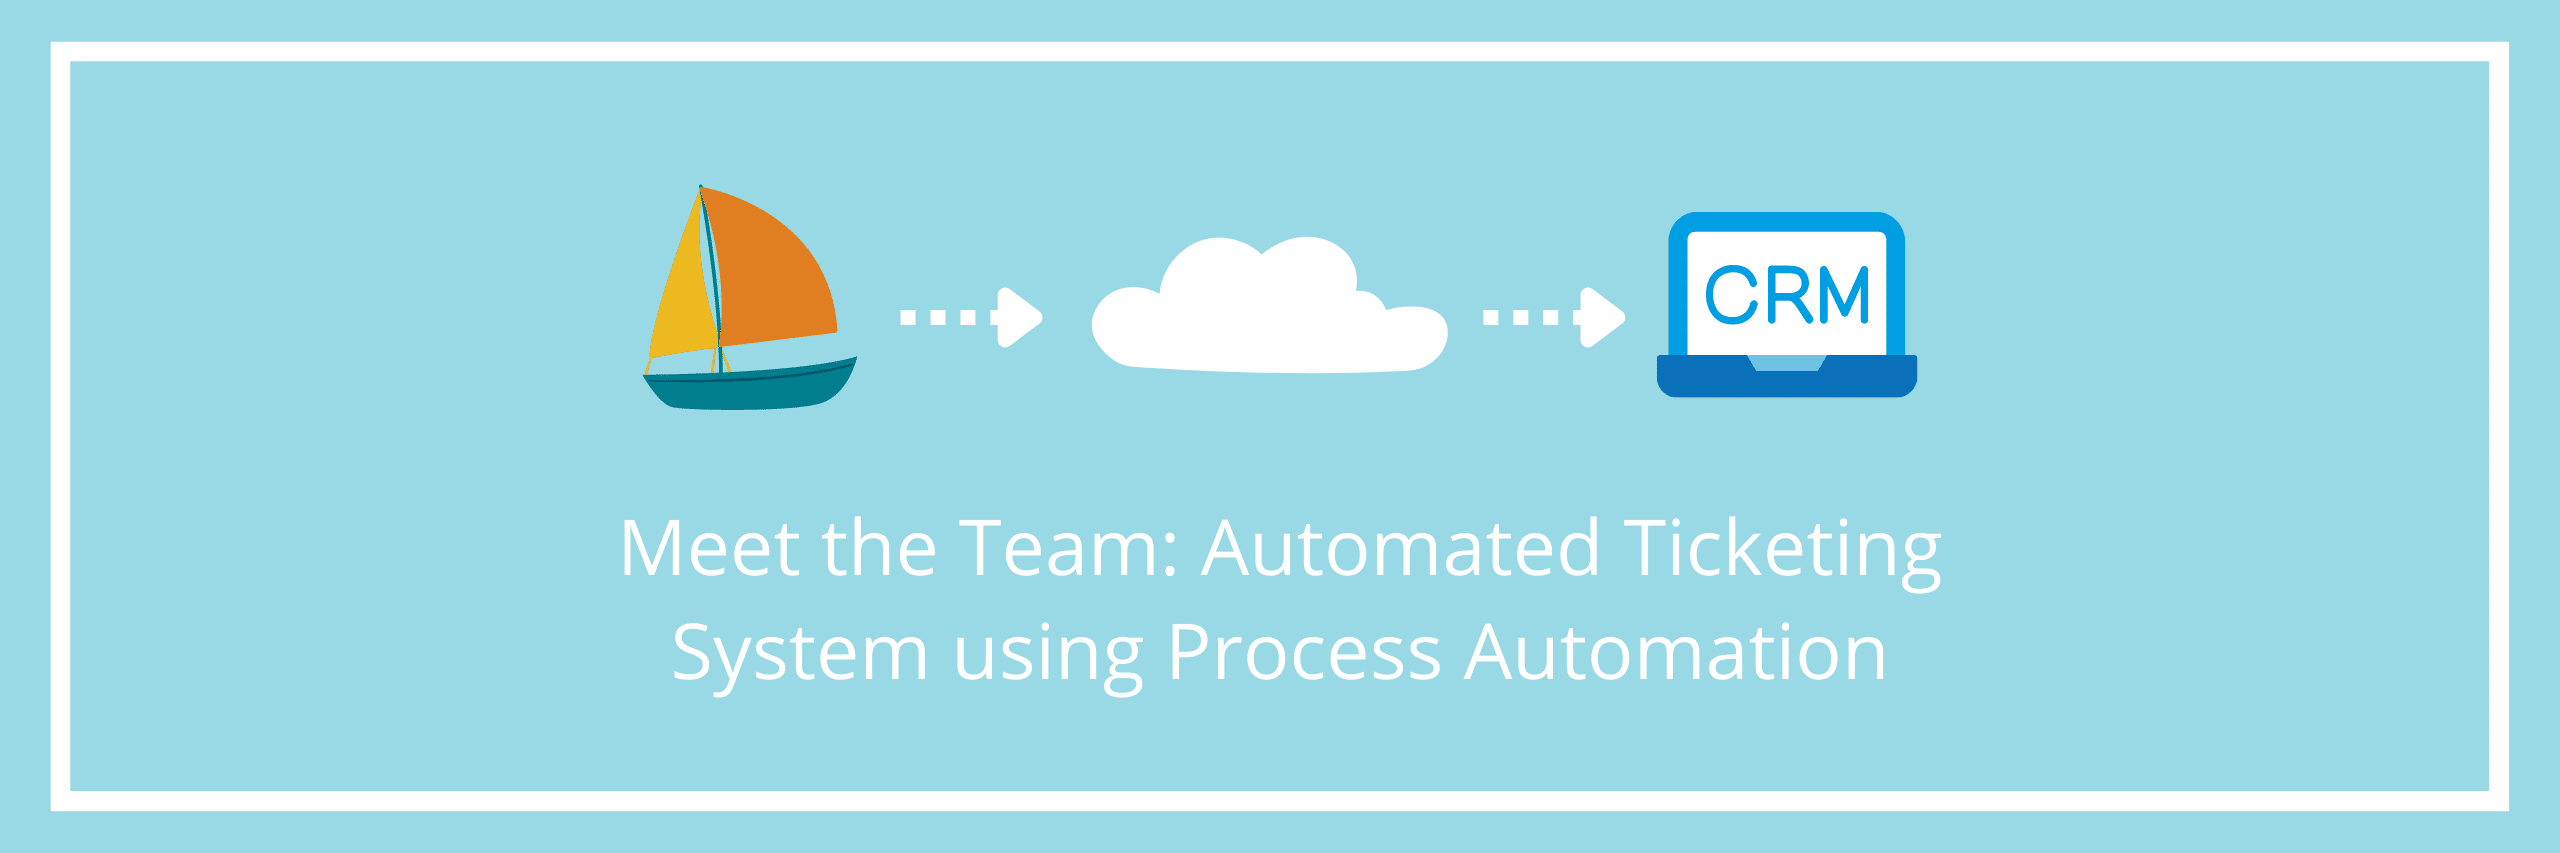 Meet the Team: Automated Ticketing System using Process Automation